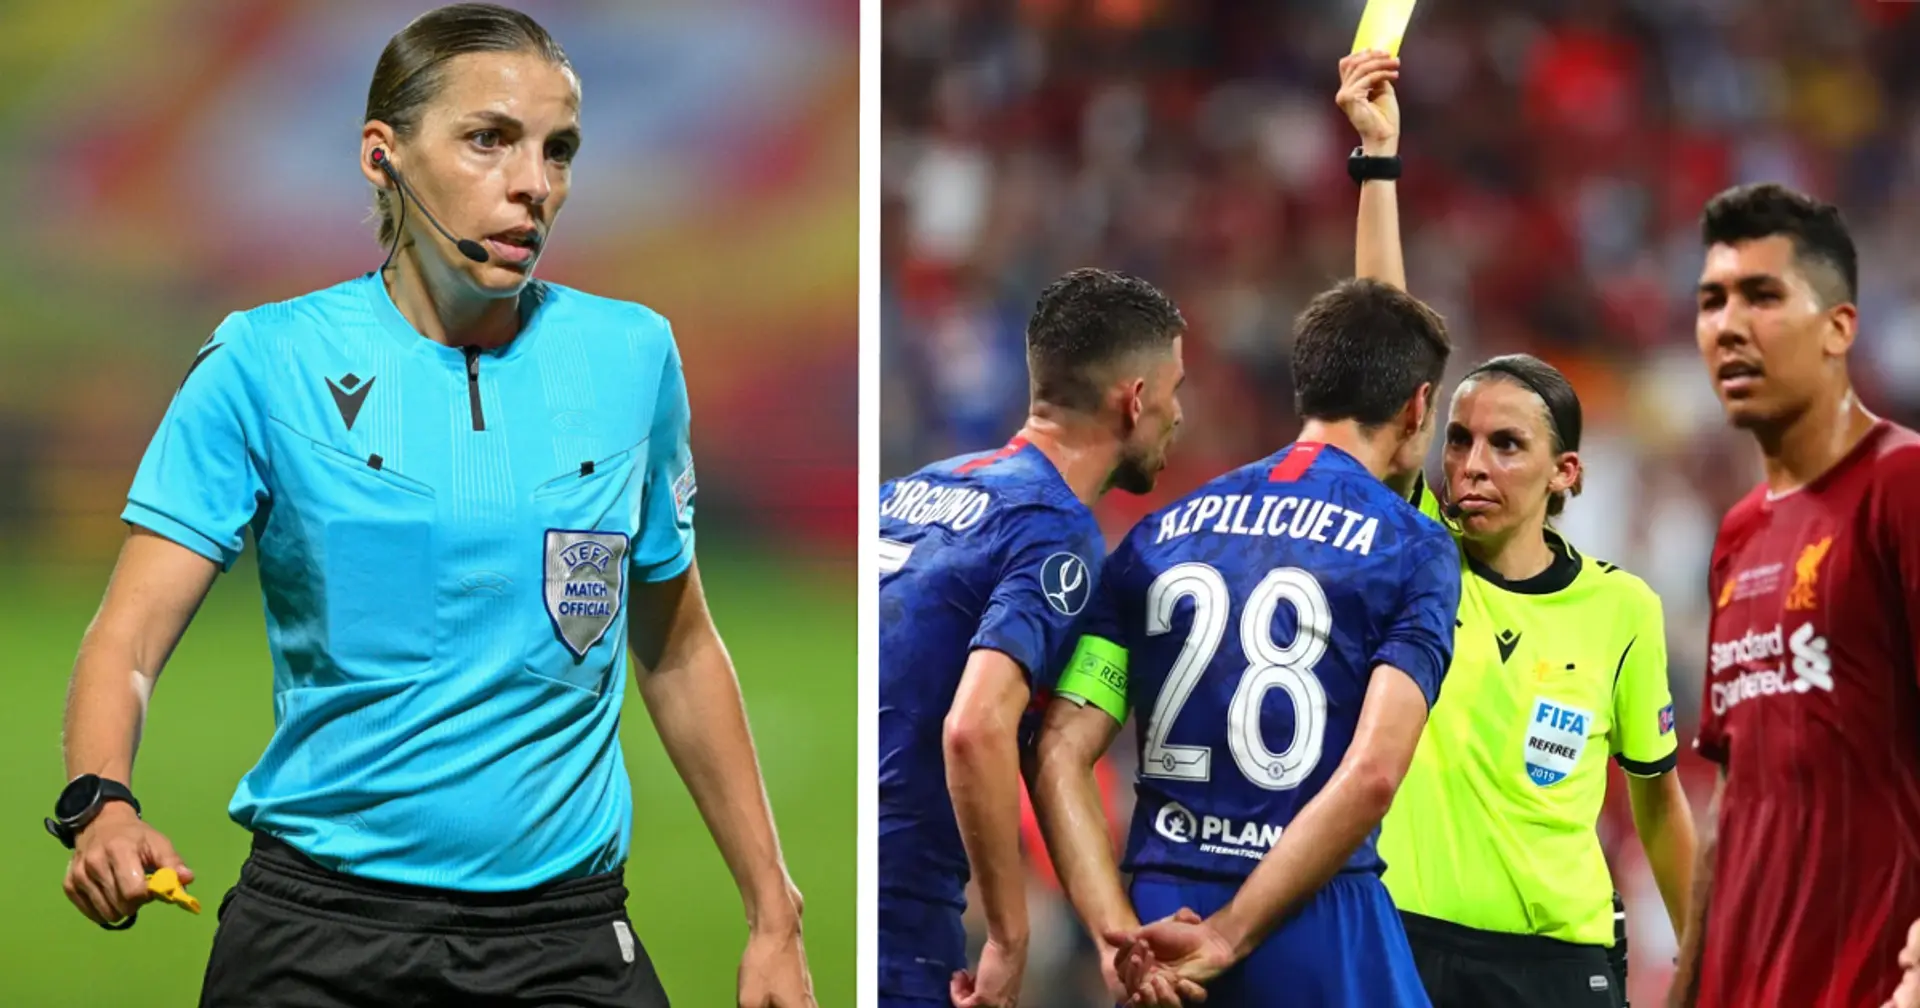 Madrid vs Celtic: French ref makes history – becomes first woman to referee a Real Madrid game